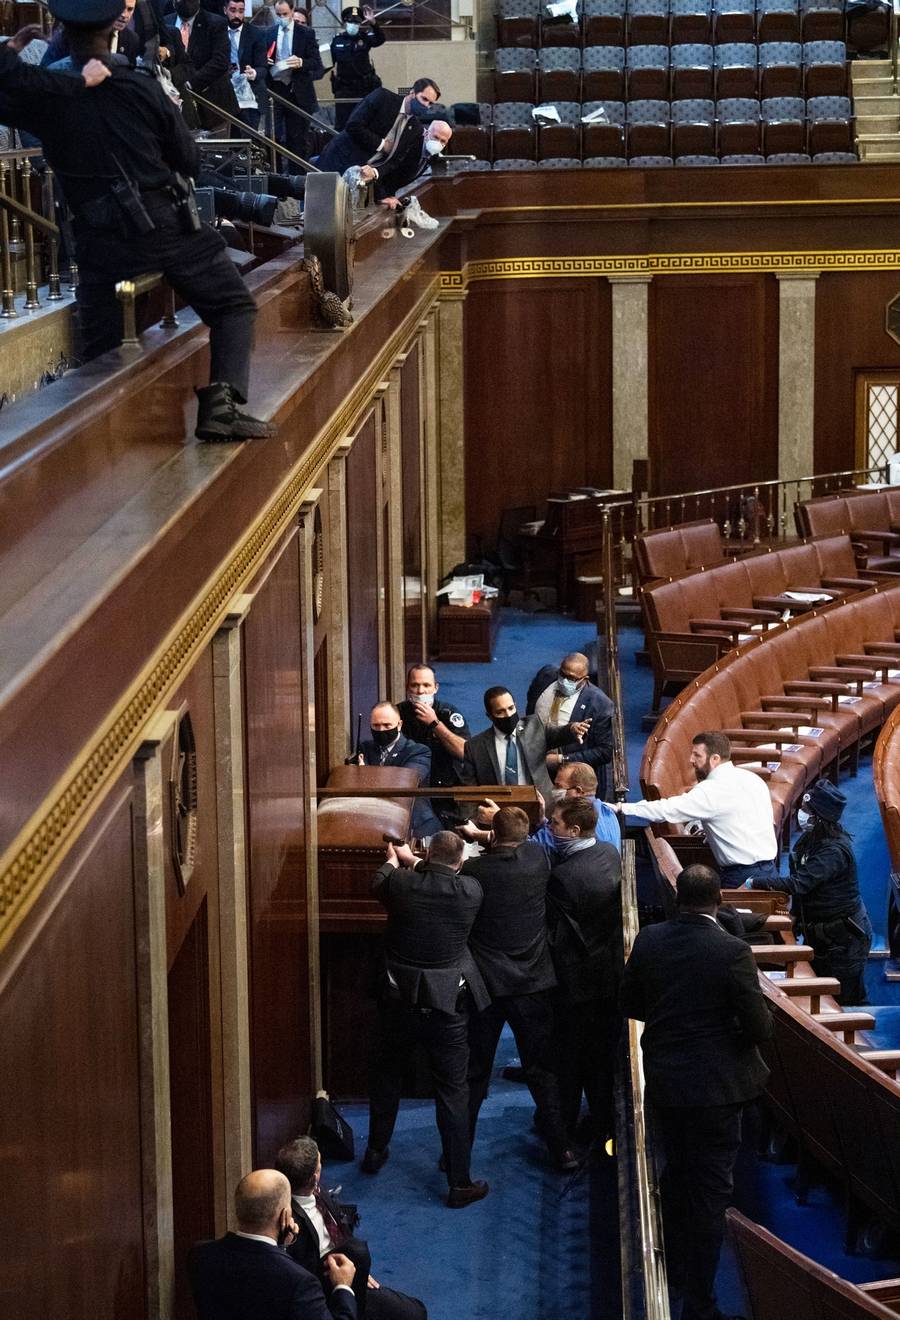 Rep. Troy Nehls, R-Texas, in blue shirt, uses a sign to drive back rioters trying to break into the House chamber to disrupt the joint session of Congress during certification of the Electoral College vote, Jan. 6, 2021